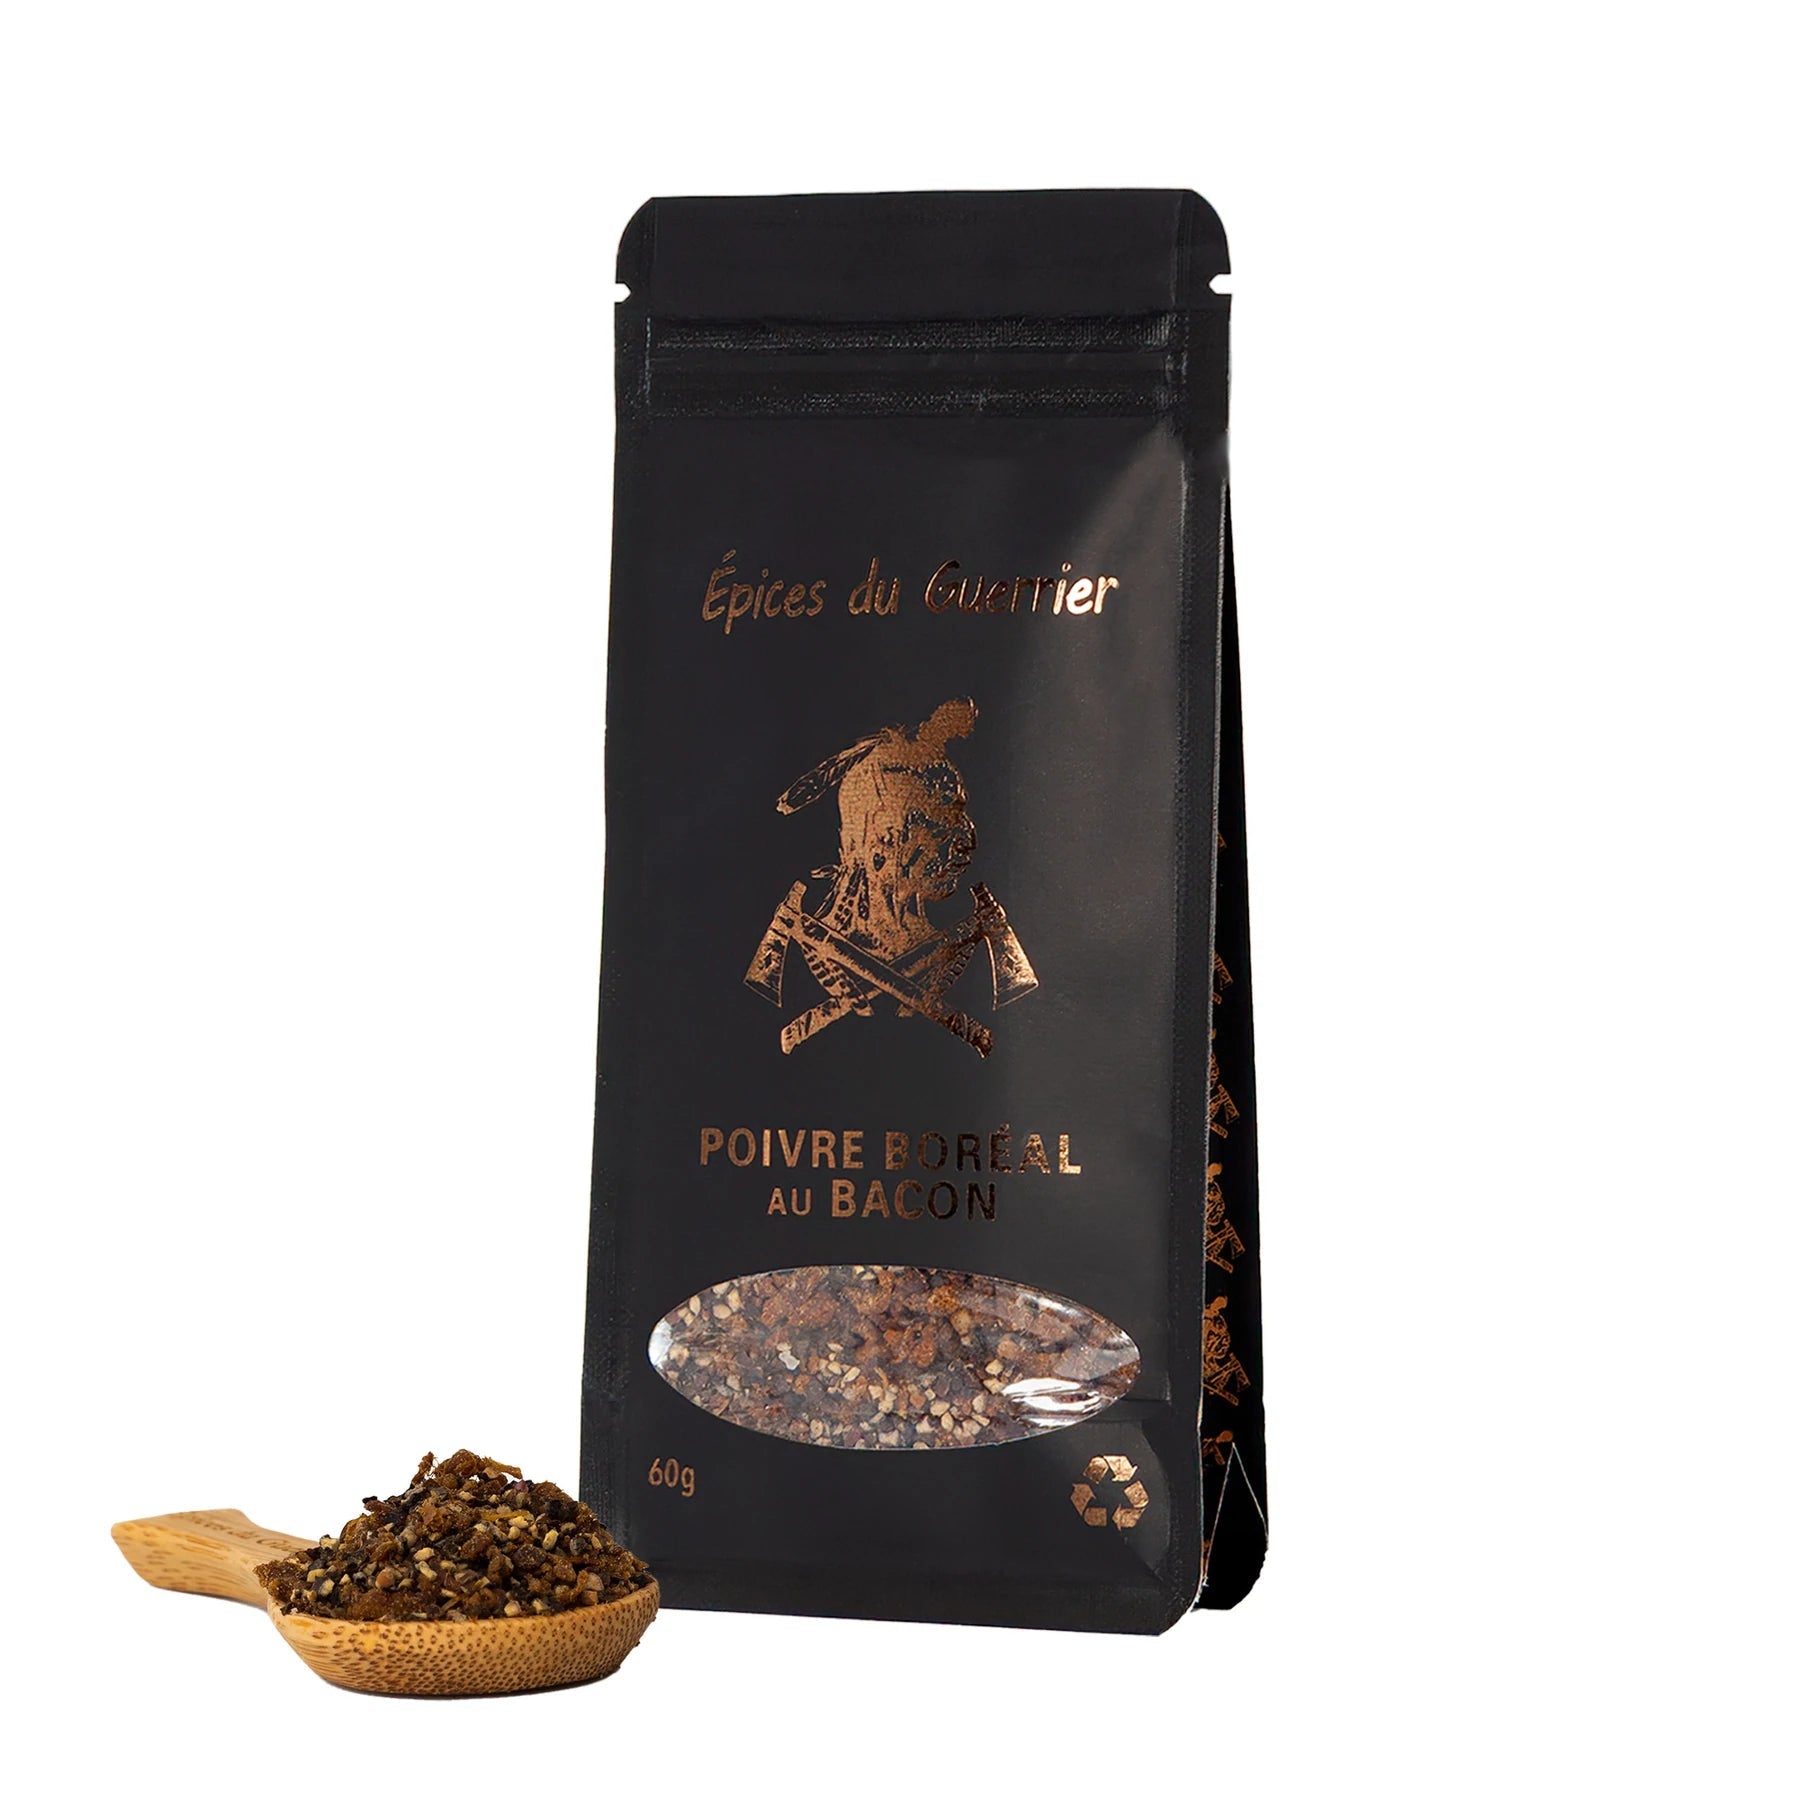 Warrior spices - Boreal pepper mixture with bacon (60g)